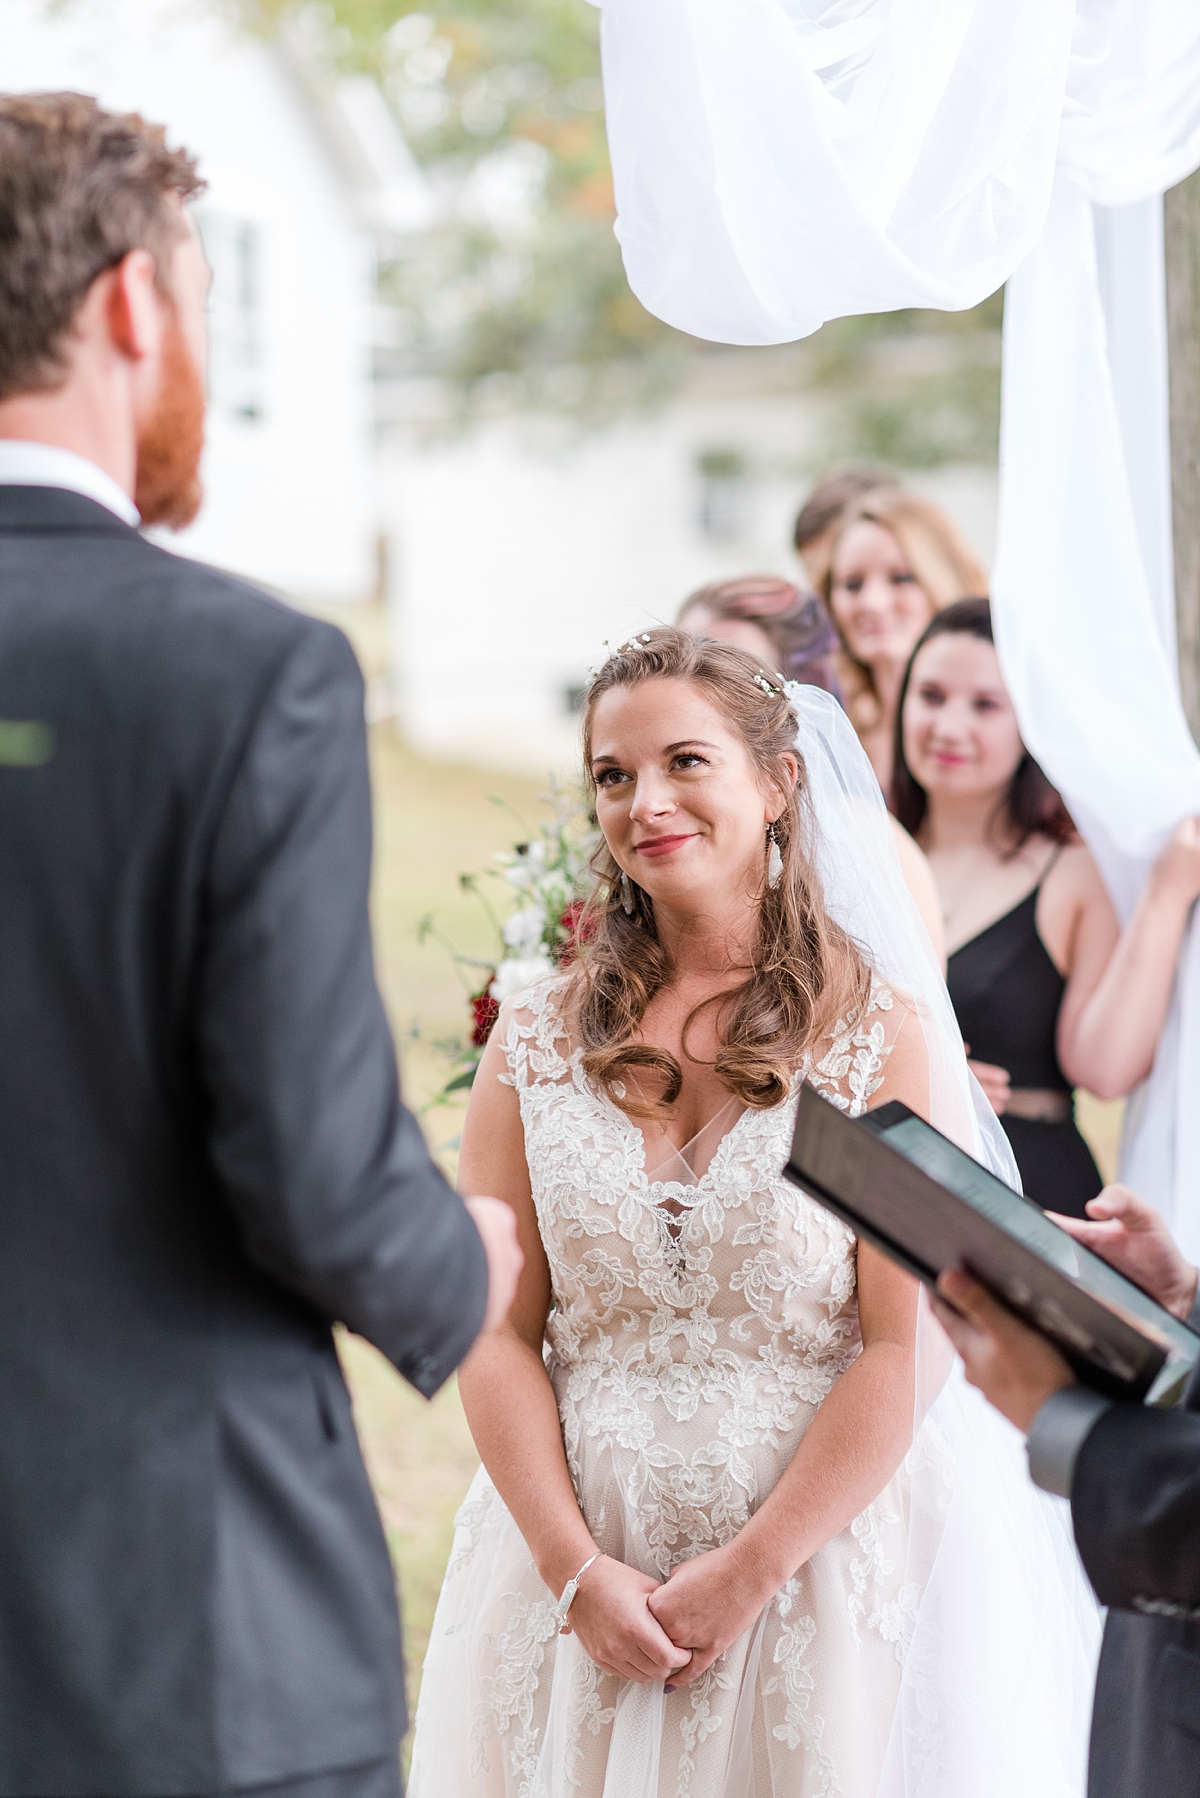 Vows During Alternative Ceremony at Lake Gaston Fall Wedding. Wedding Photography by Richmond Wedding Photographer Kailey Brianne Photography. 